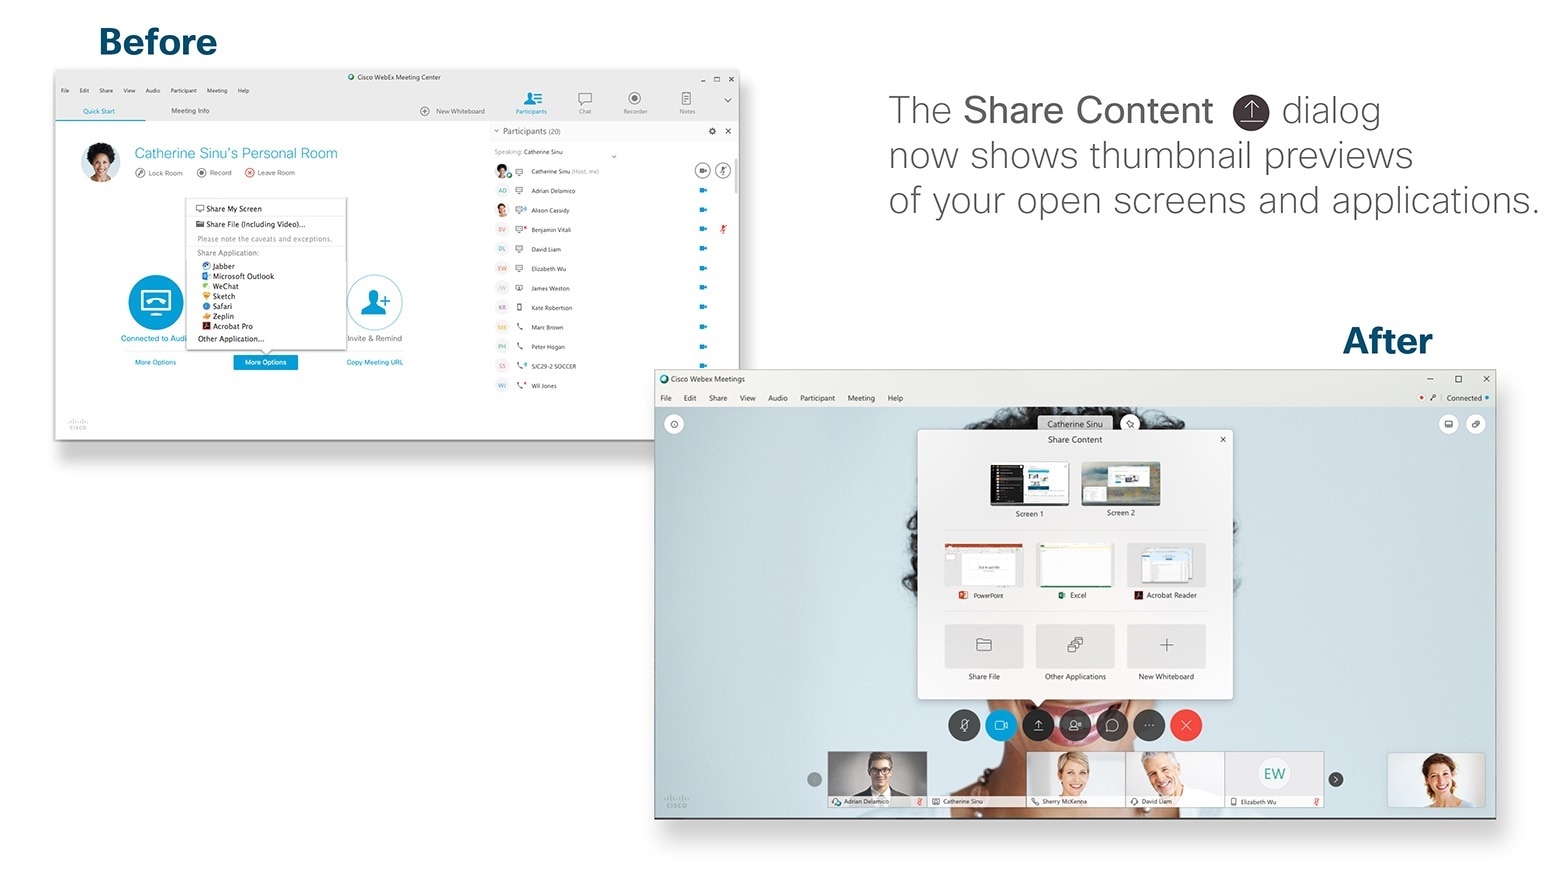 Before and after comparison of the Share Content dialog.